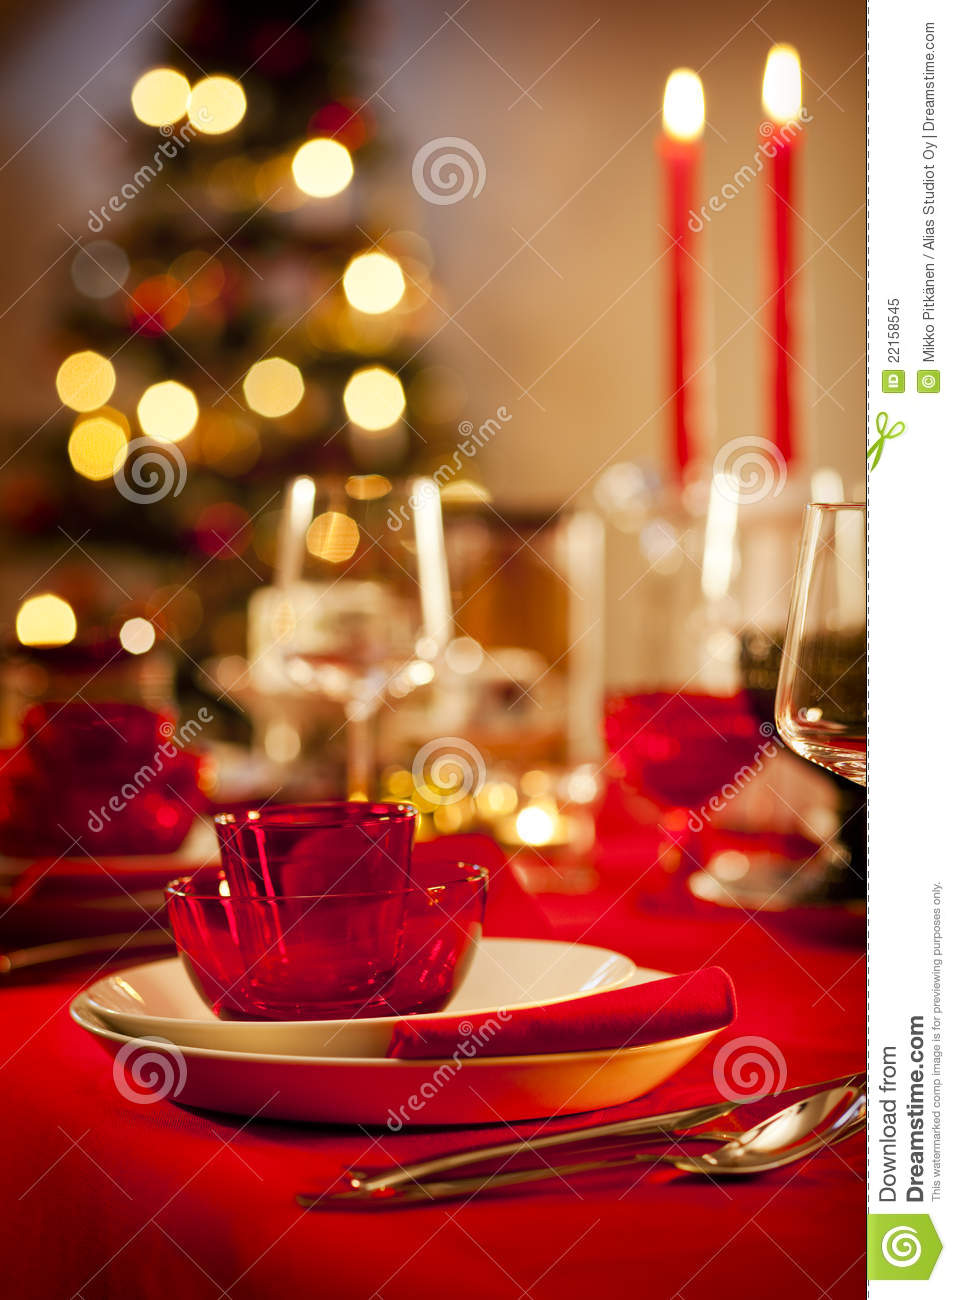 Christmas Dinner Table Pictures Wallpapers